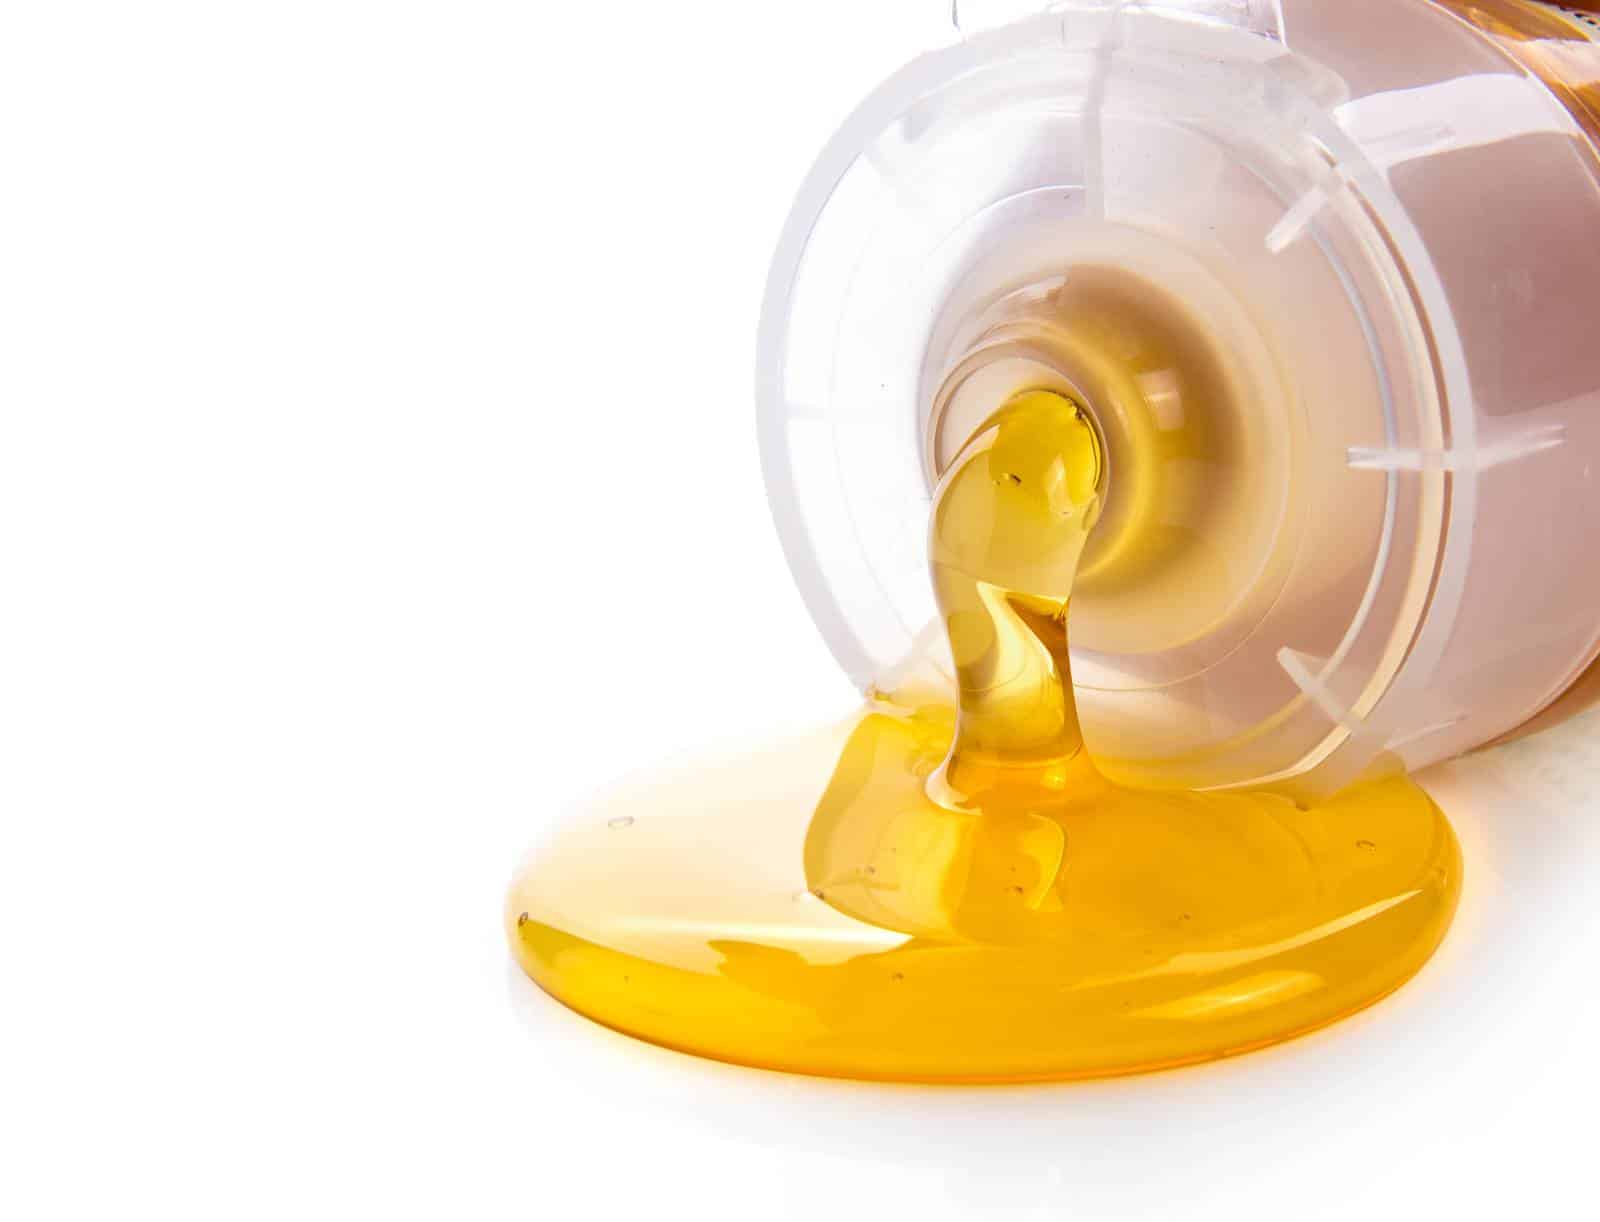 Do you need to sanitize honey?